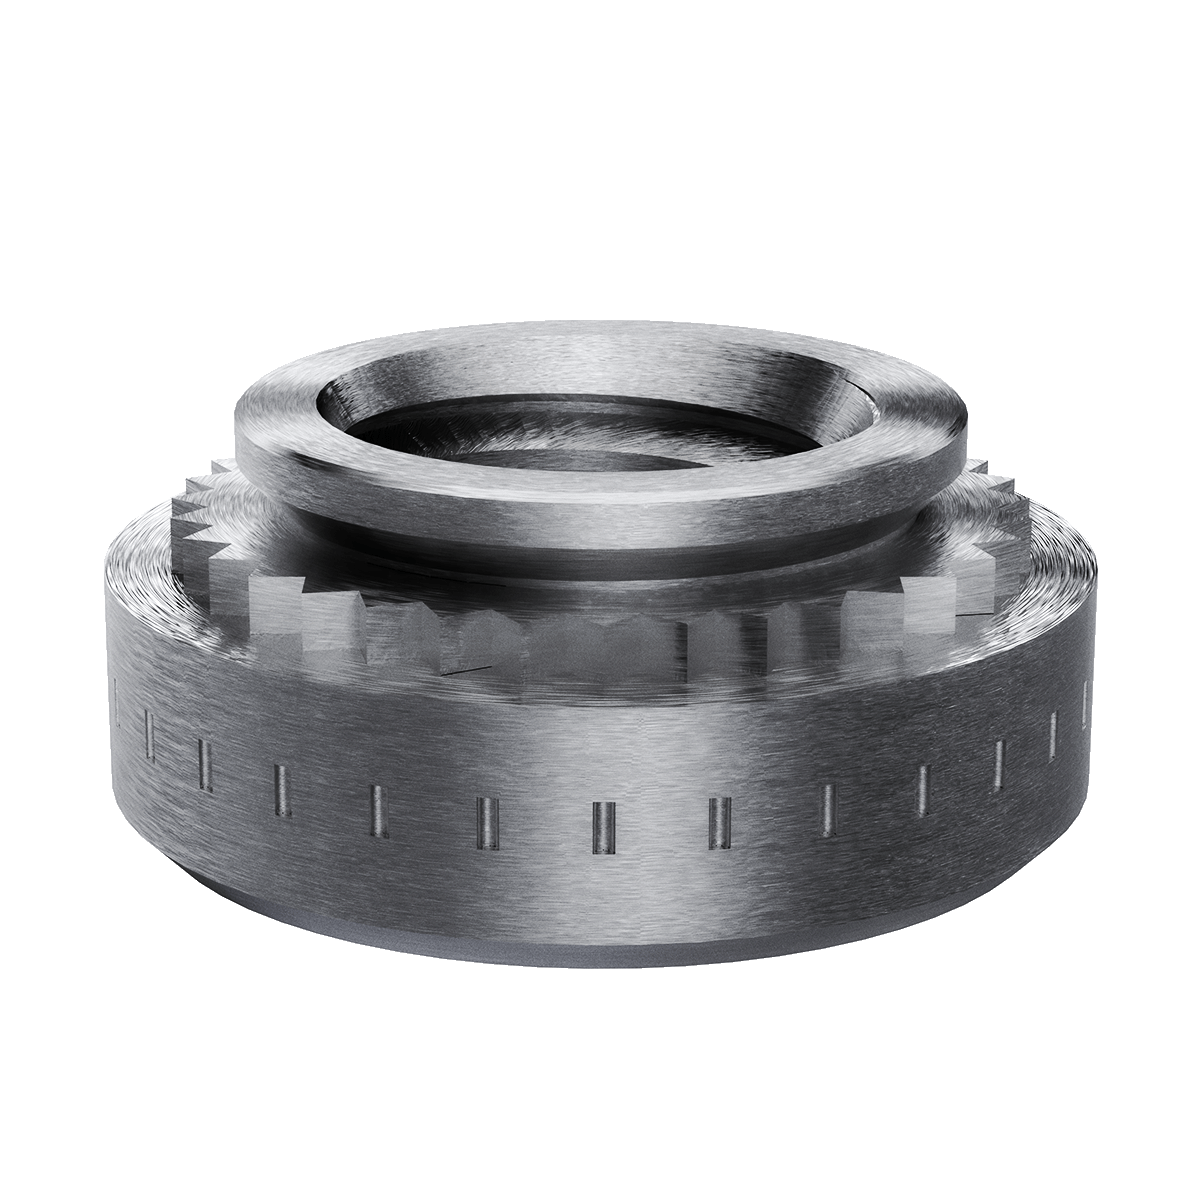 Self-Clinching Nut, For SS, 17-4 Stainless Steel, Passivated, Metric, M3x0.5 x 0, 100 Pack